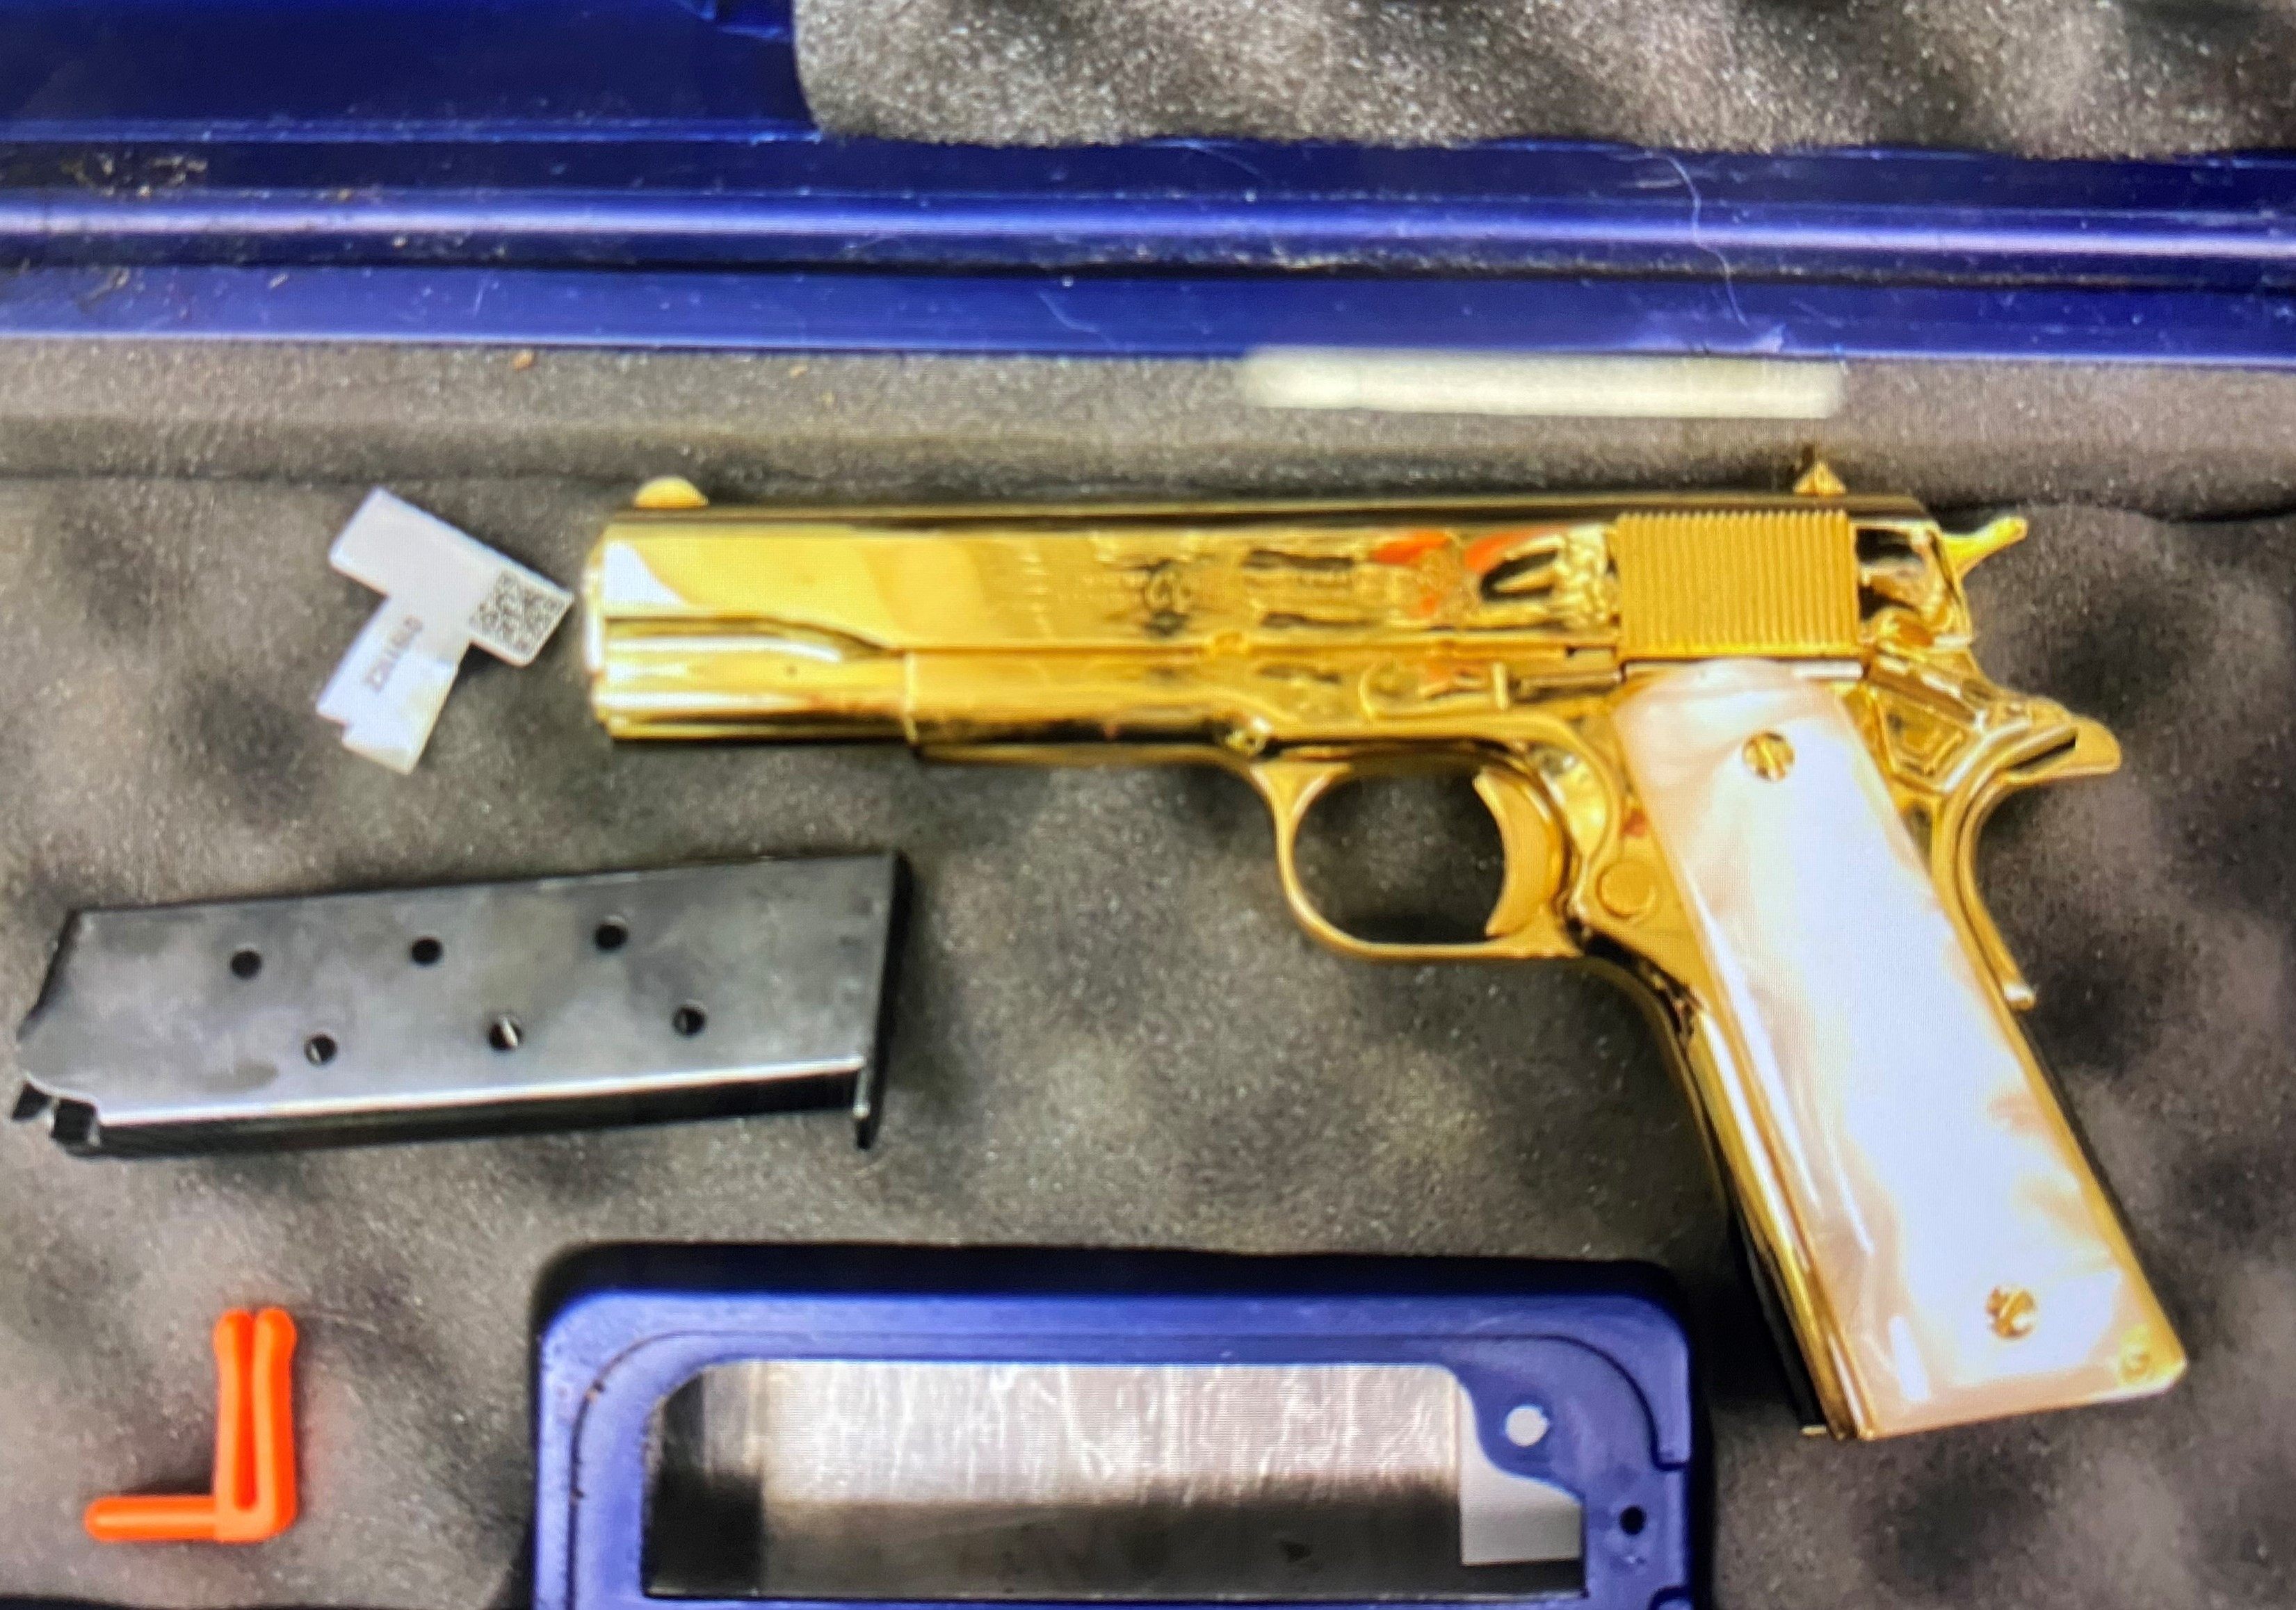 The US woman took an undeclared 24-carat gold-plated handgun on her flight from Los Angeles to Sydney. Photo: Australian Border Force